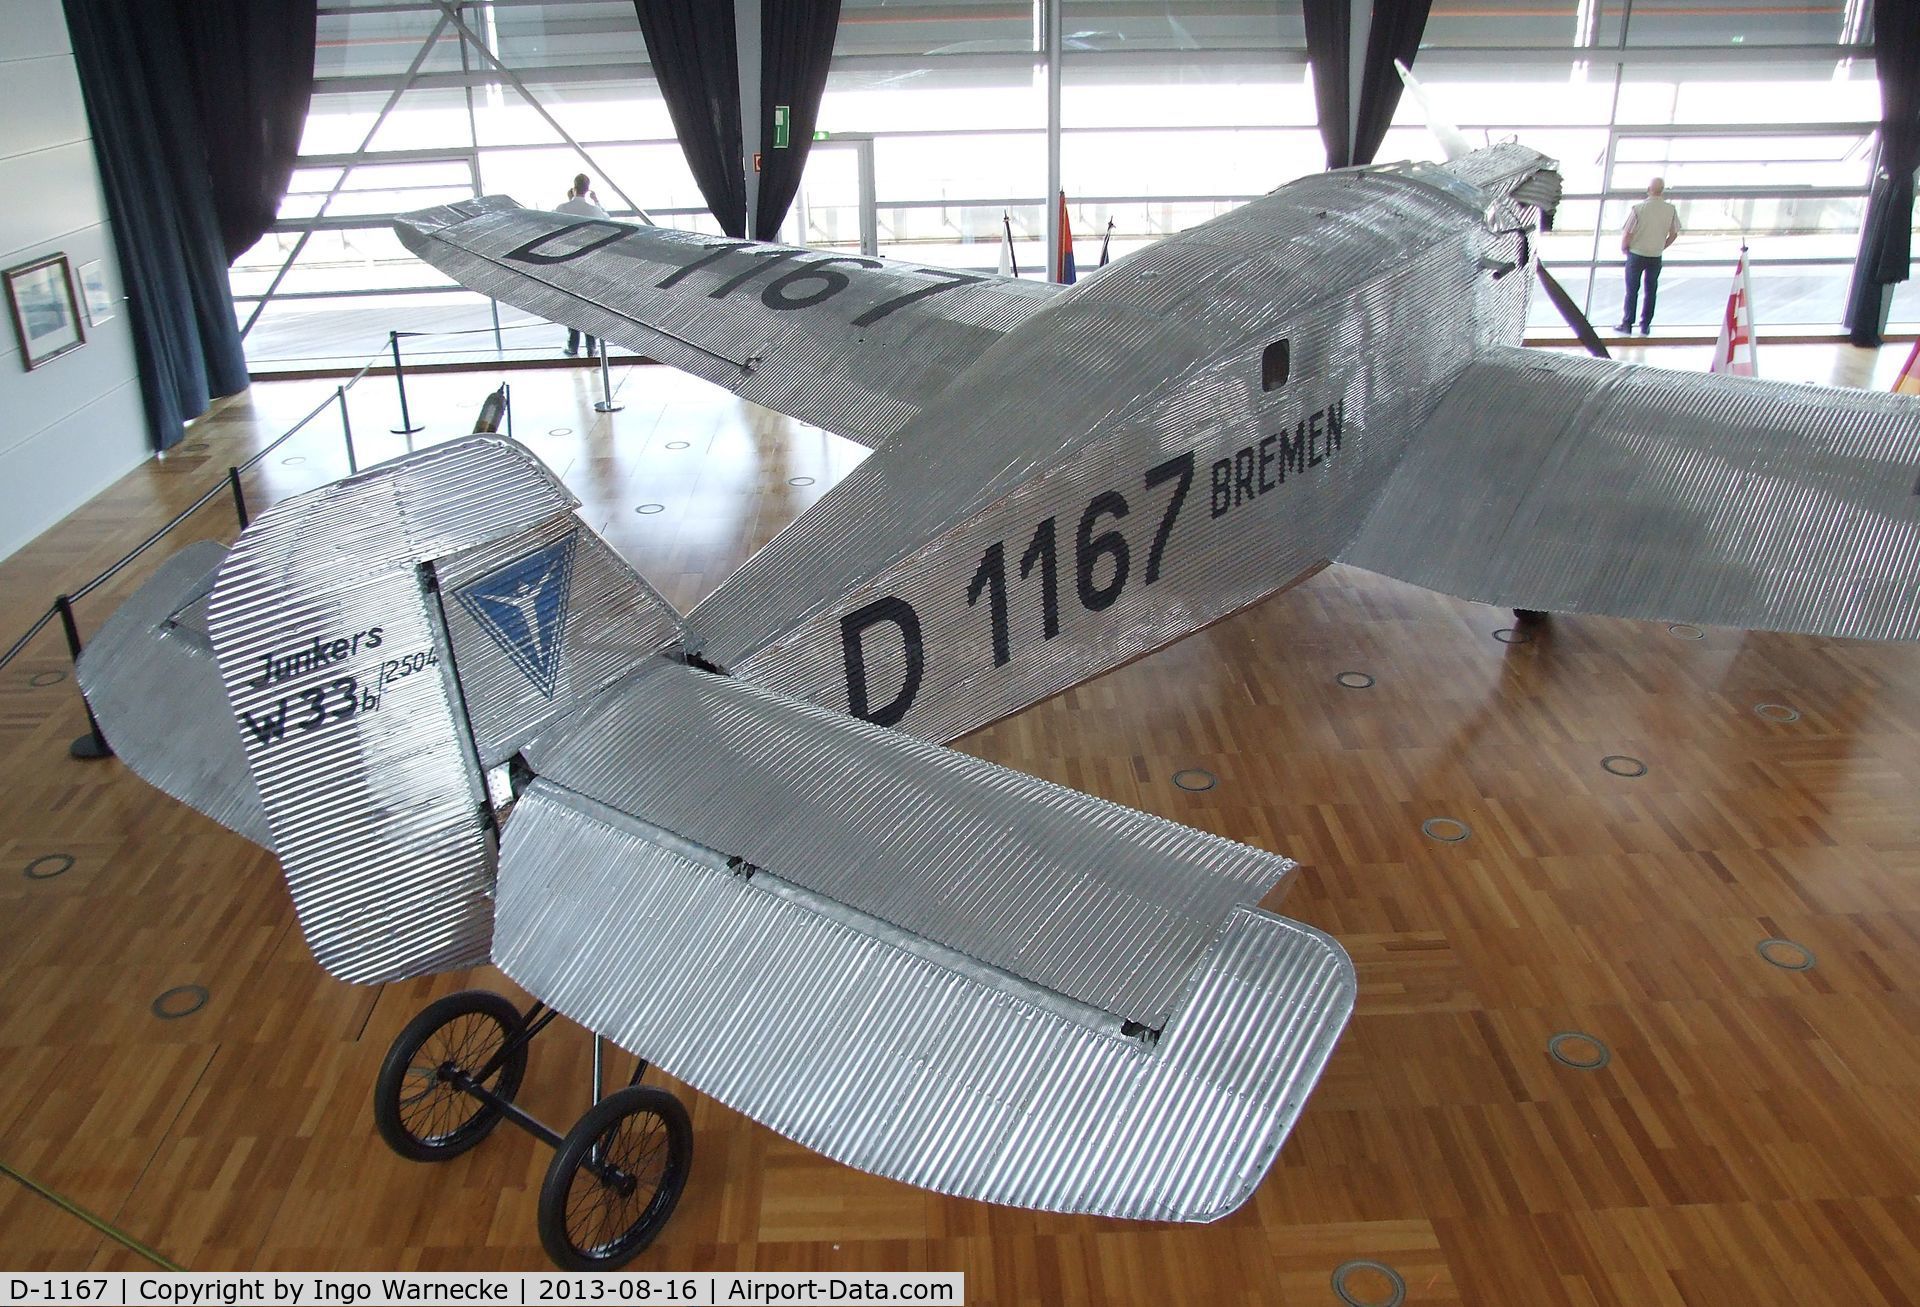 D-1167, Junkers W 33b C/N 2504, Junkers W 33b 'BREMEN', the first plane to cross the North Atlanic ocean from east to west in 1928 (on long term loan from the Henry Ford Museum, Dearborn MI, restored and exibited at Bremen airport, Bremen GERMANY)